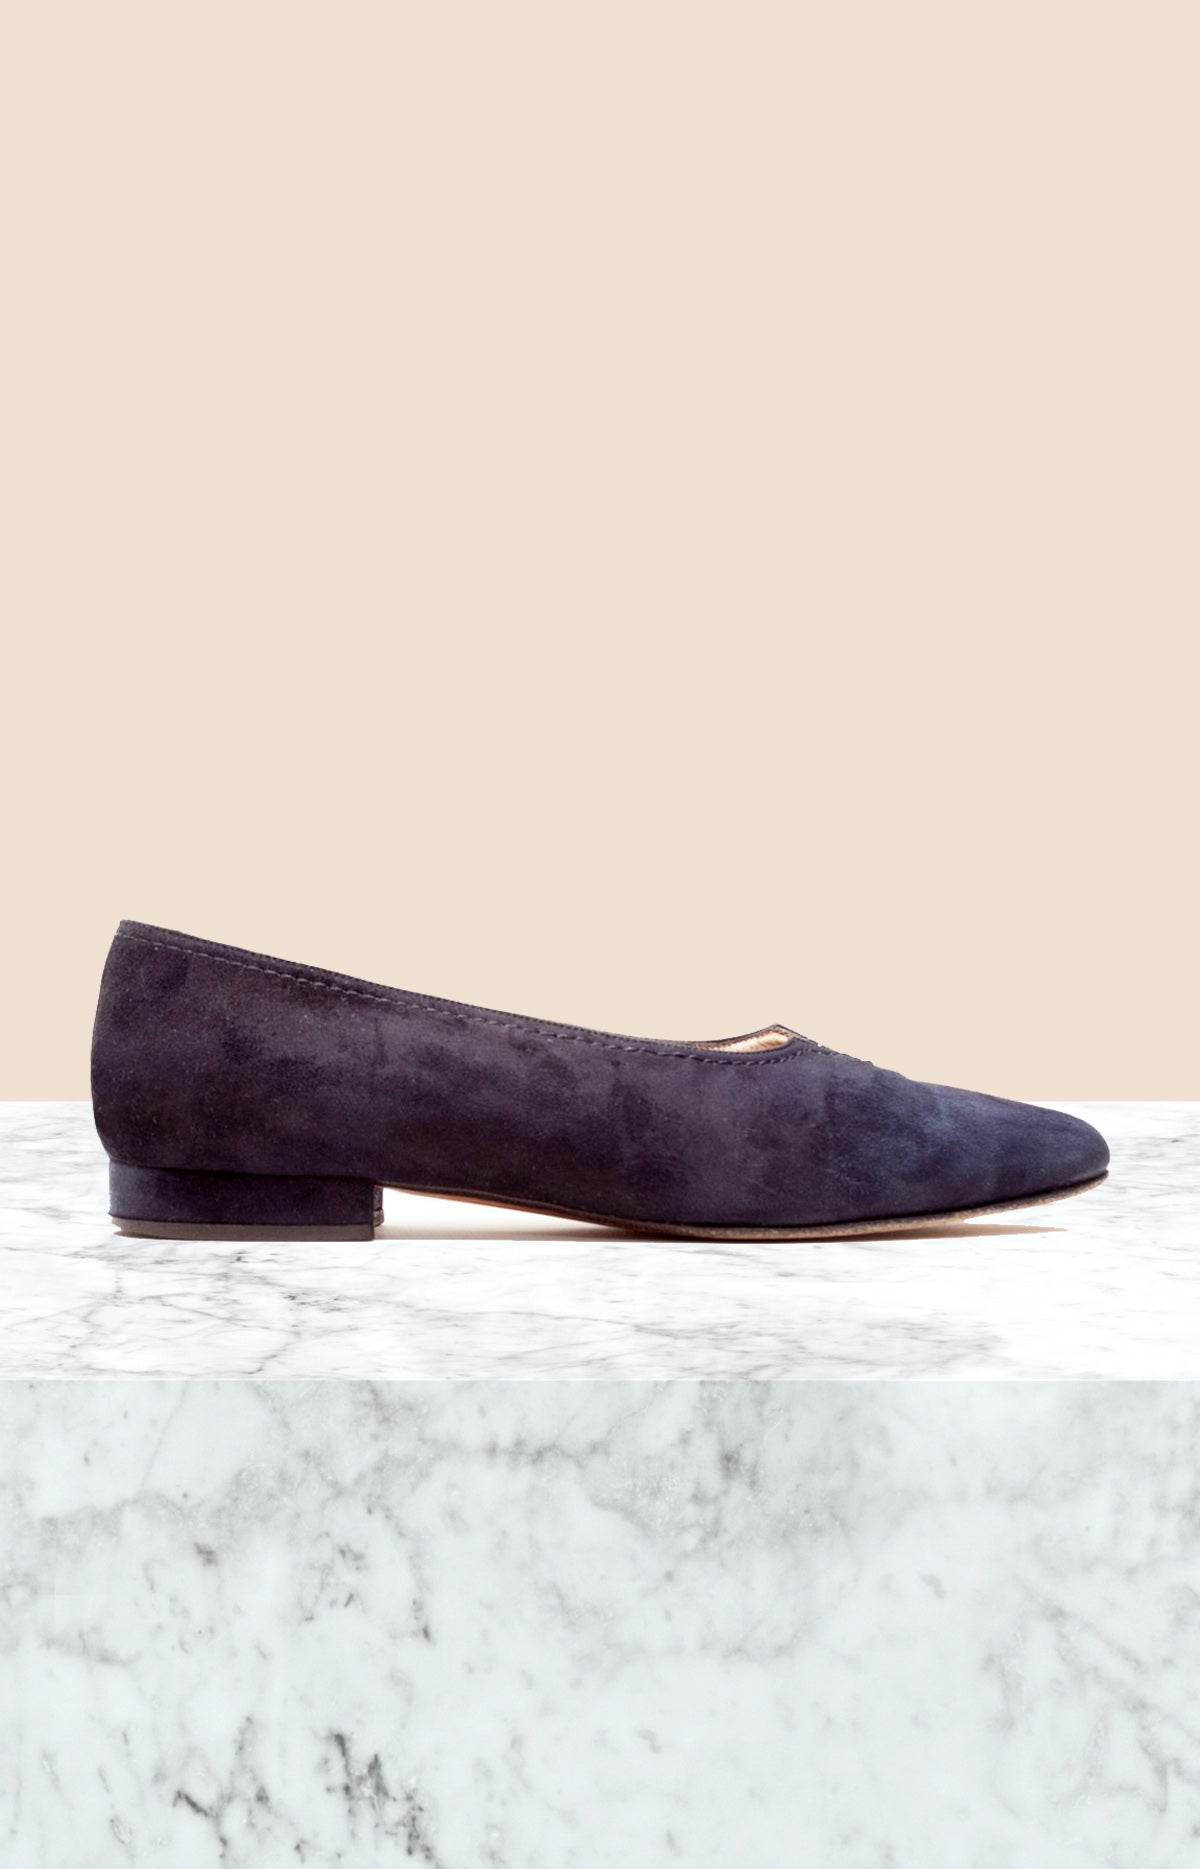 Andrea Pfister Vintage Suede Flats